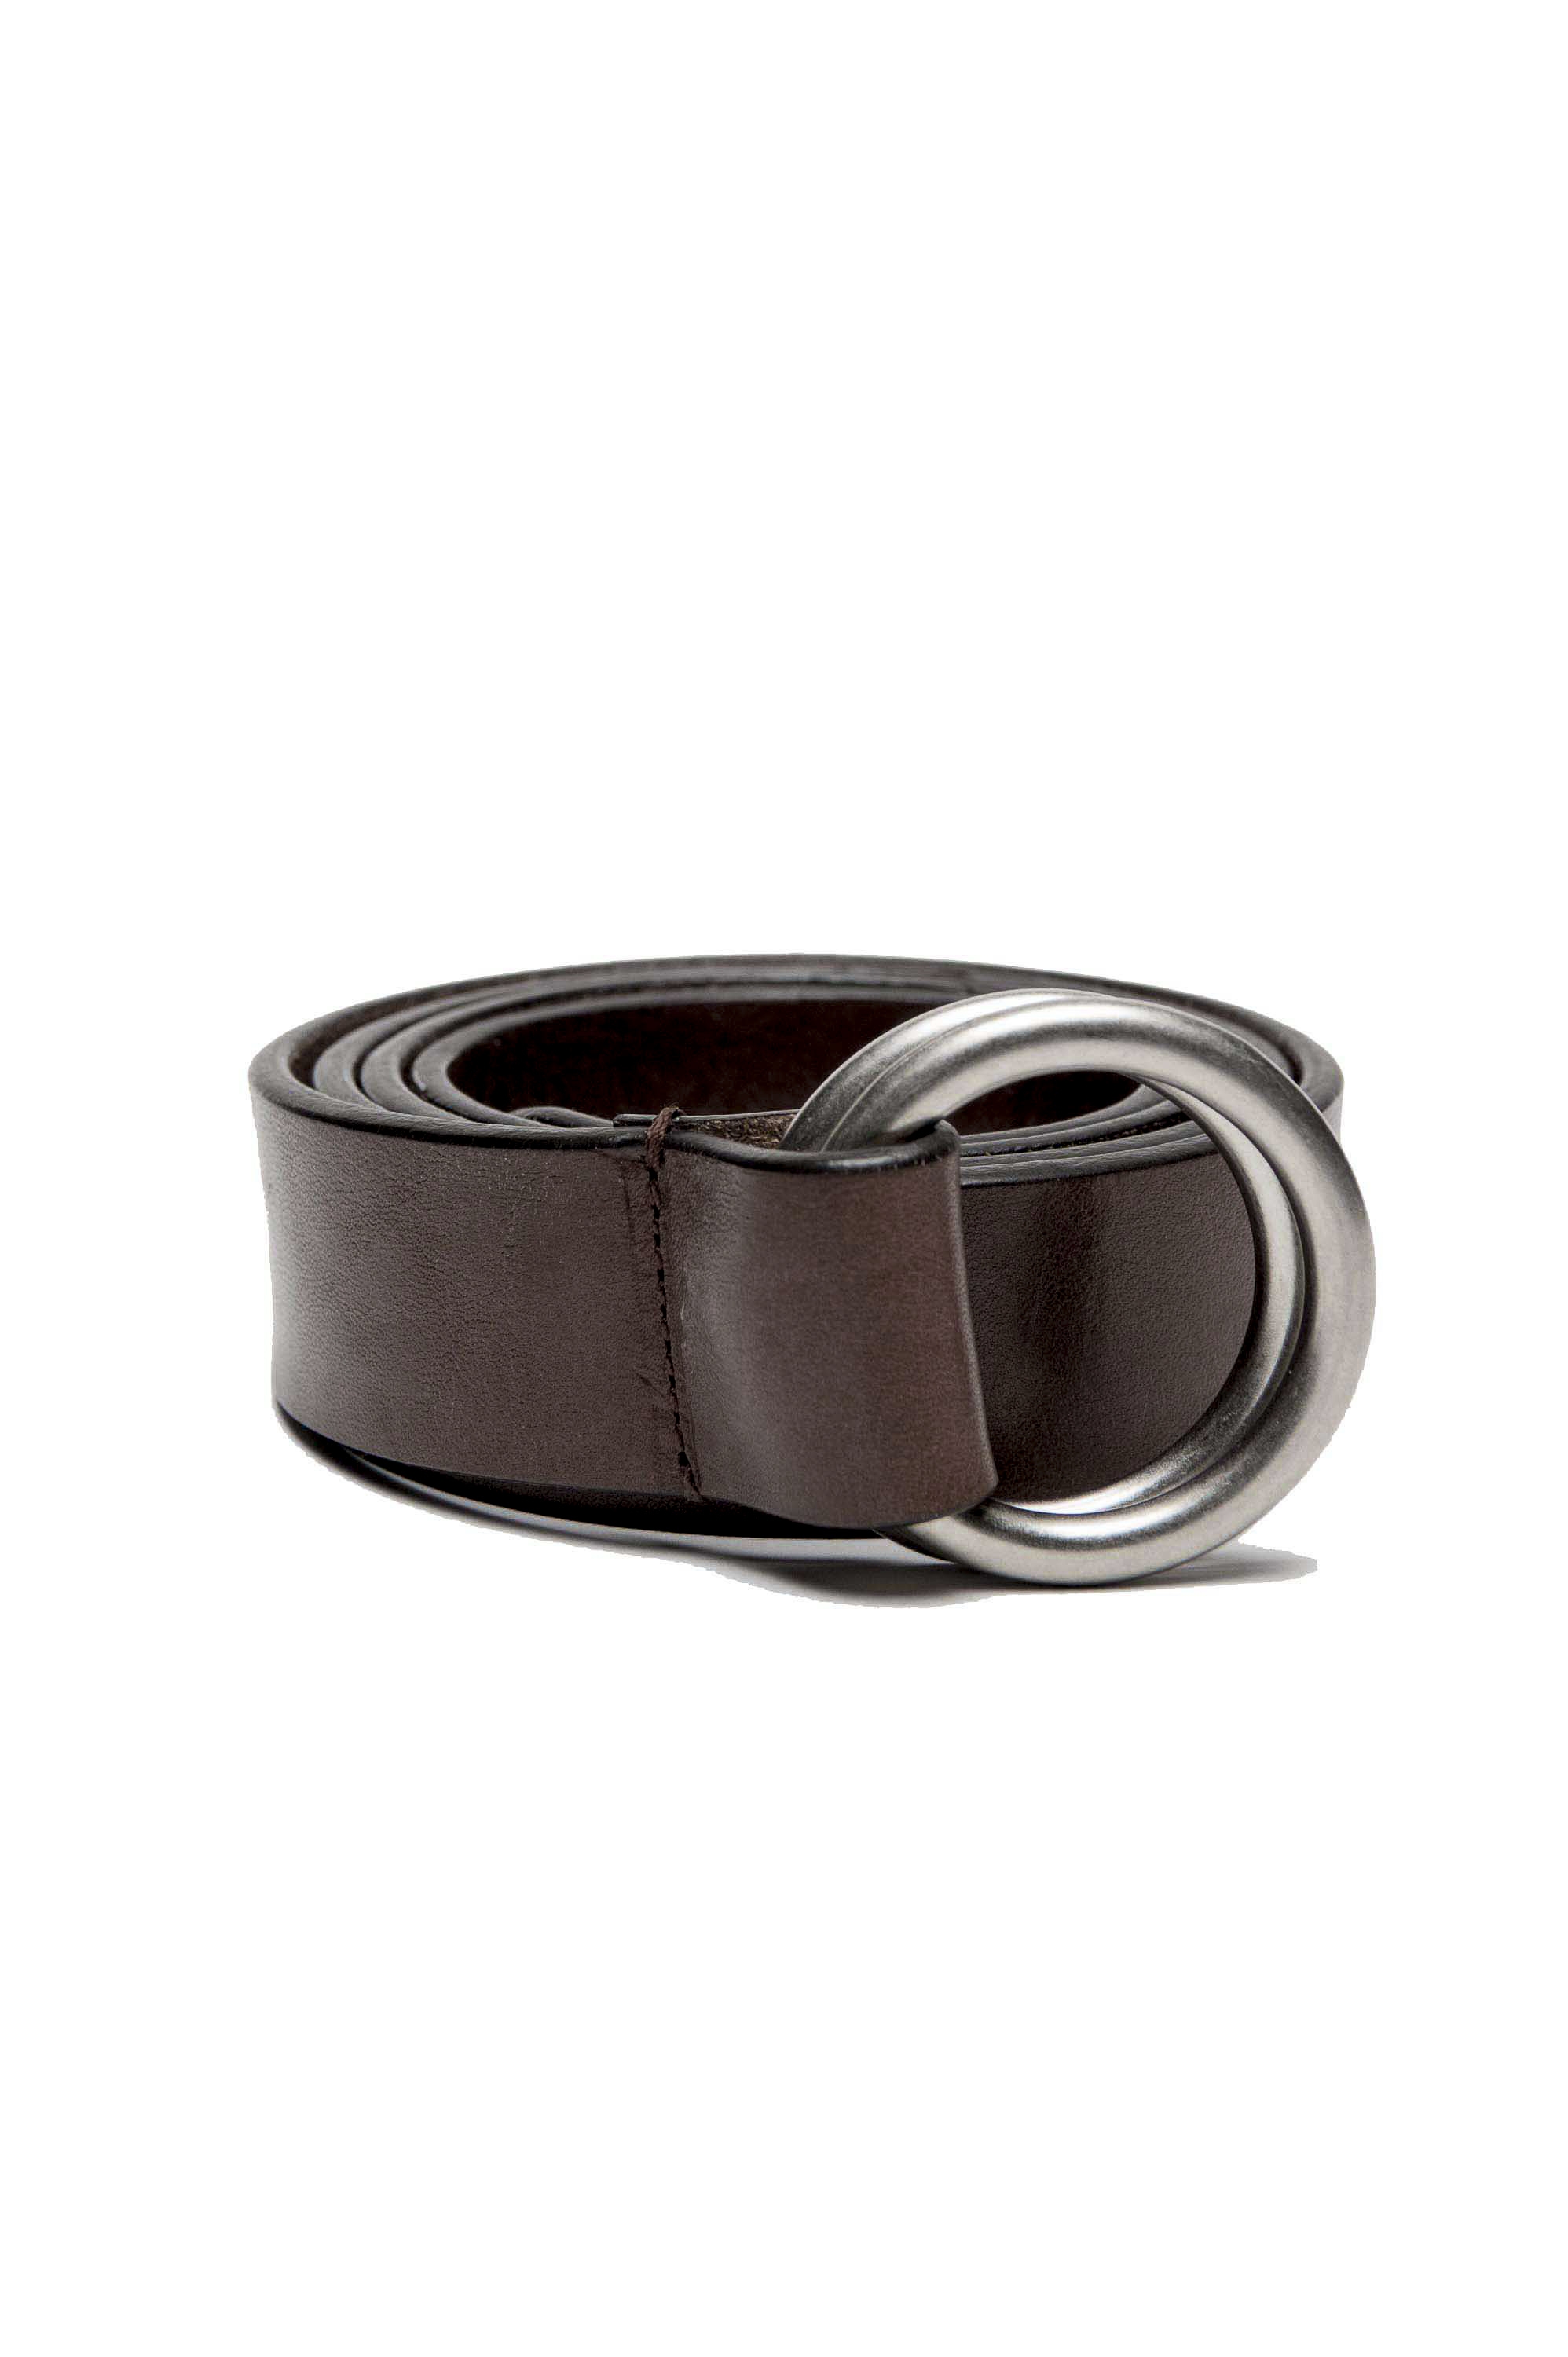 SBU 03025_2021AW Iconic brown leather 1.2 inches belt 01